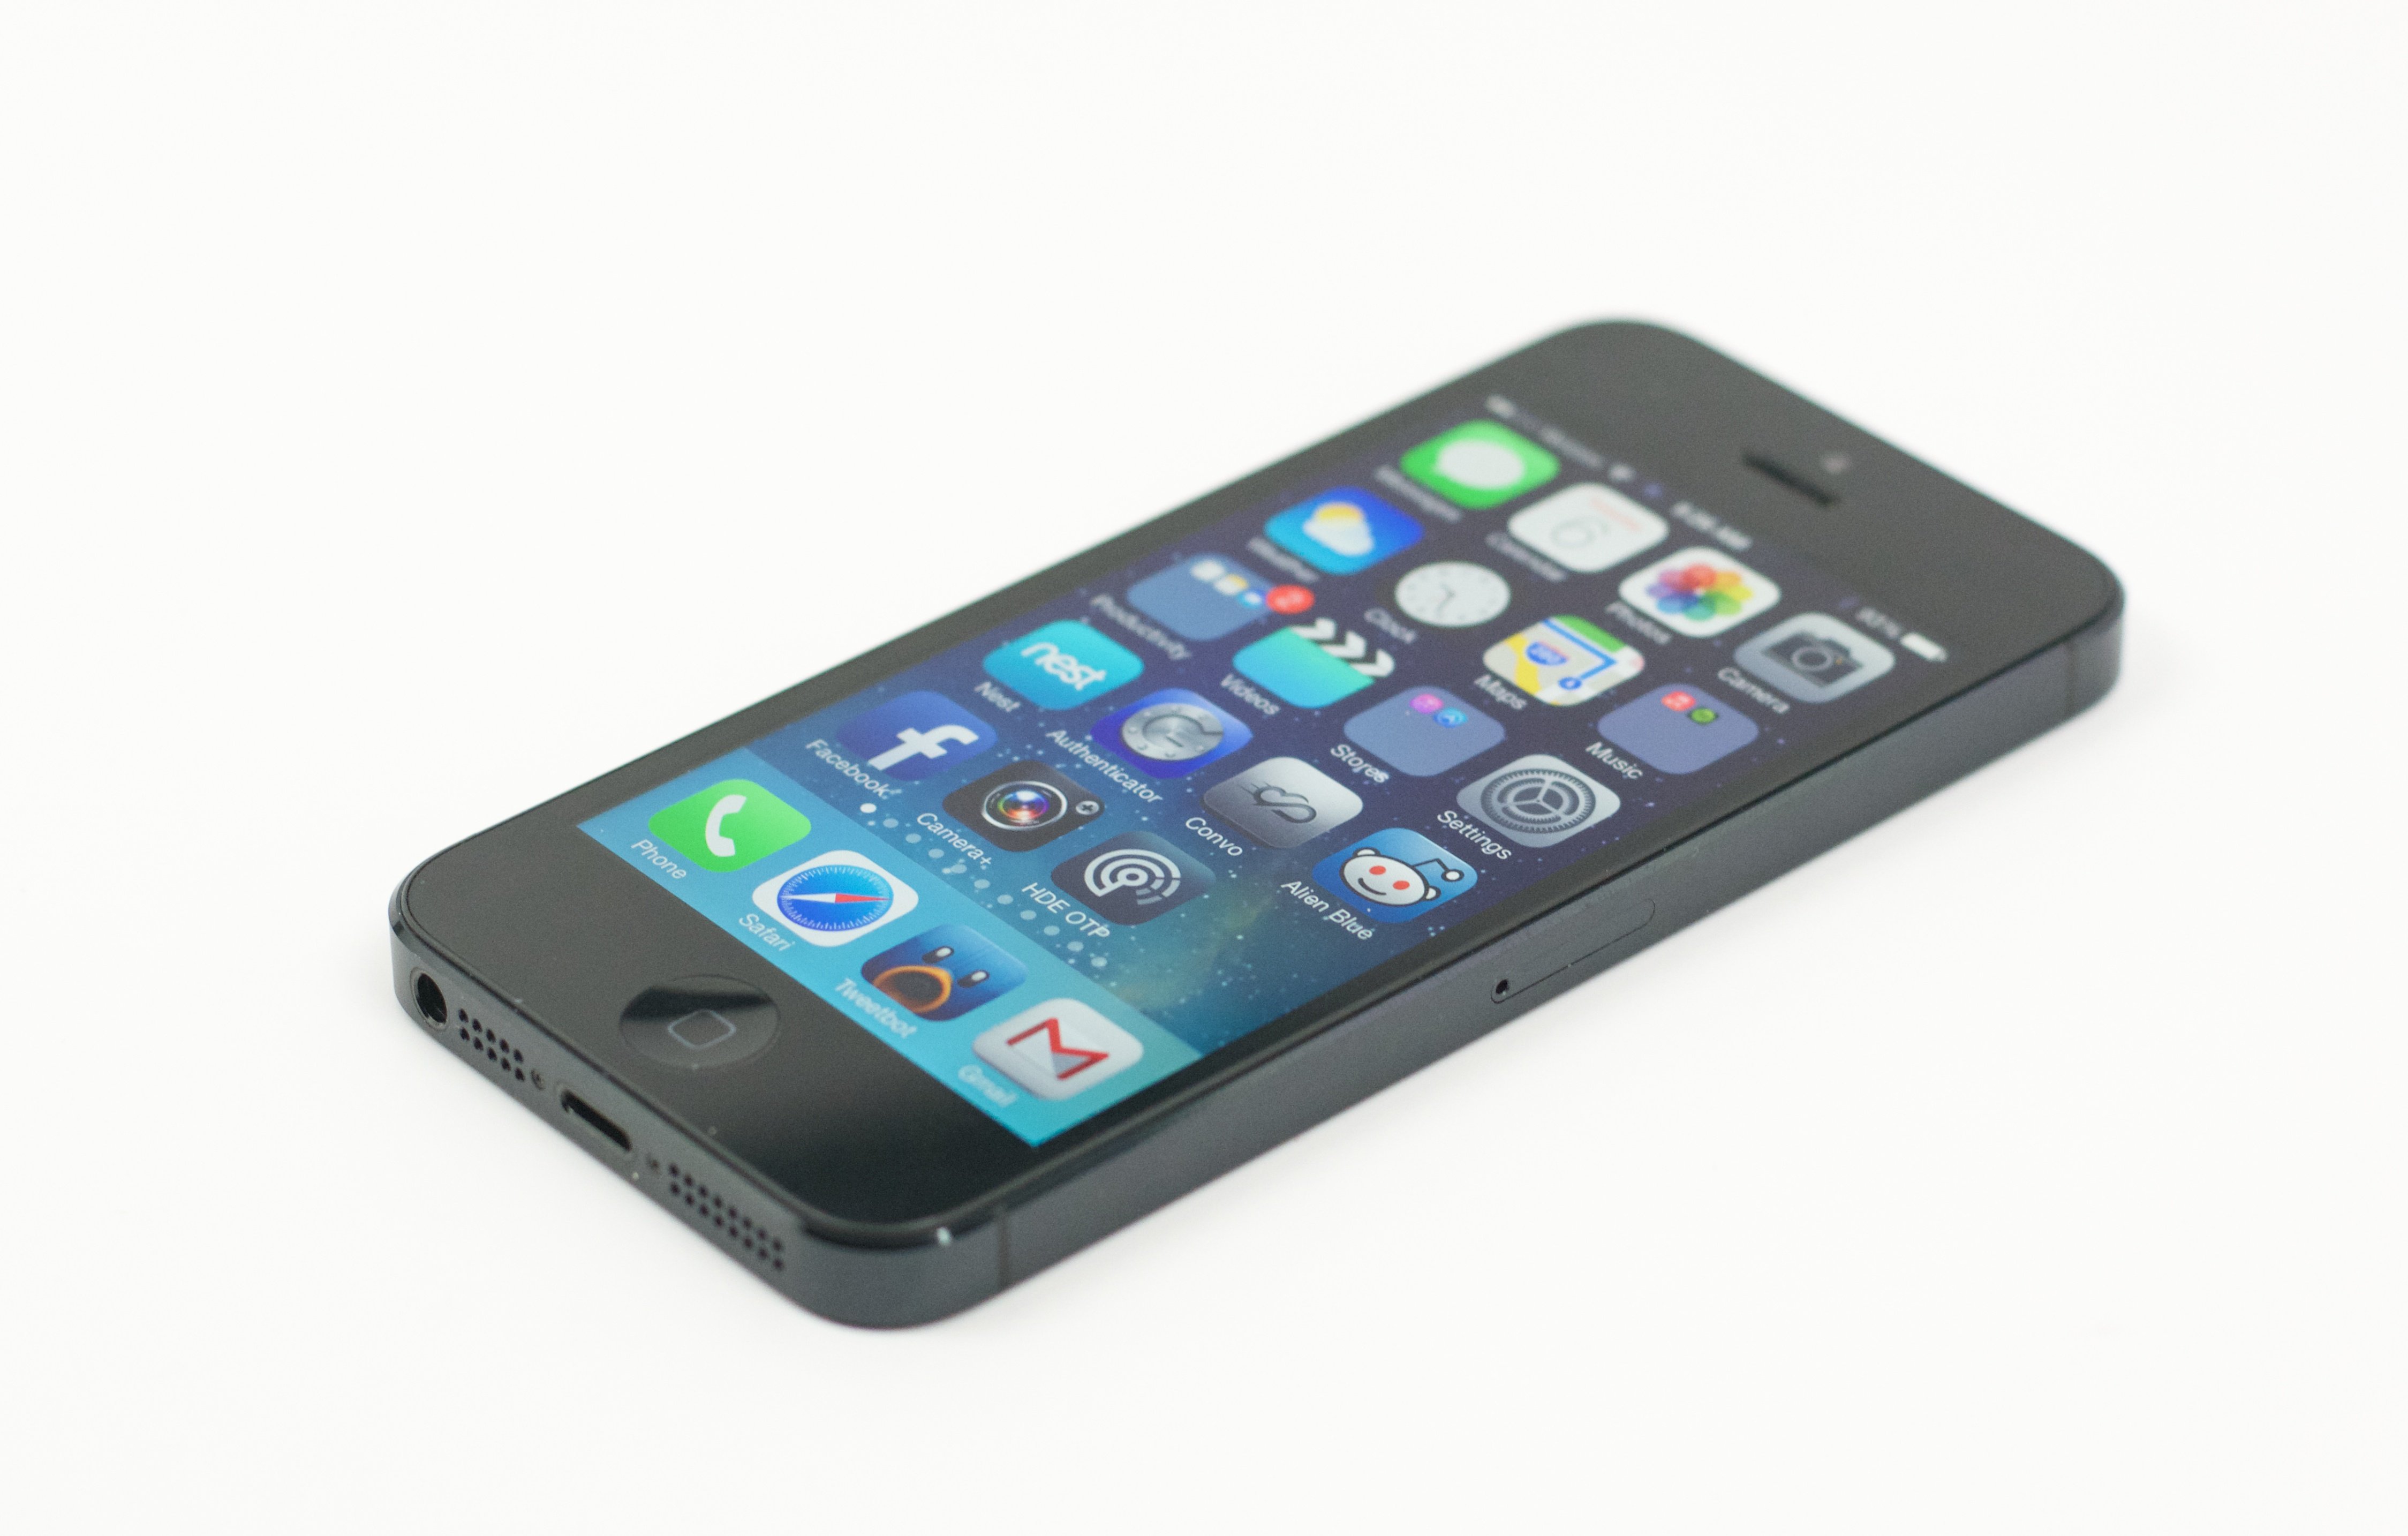 We cover who should wait for the iPhone 5S, and who should buy the iPhone 5 today.